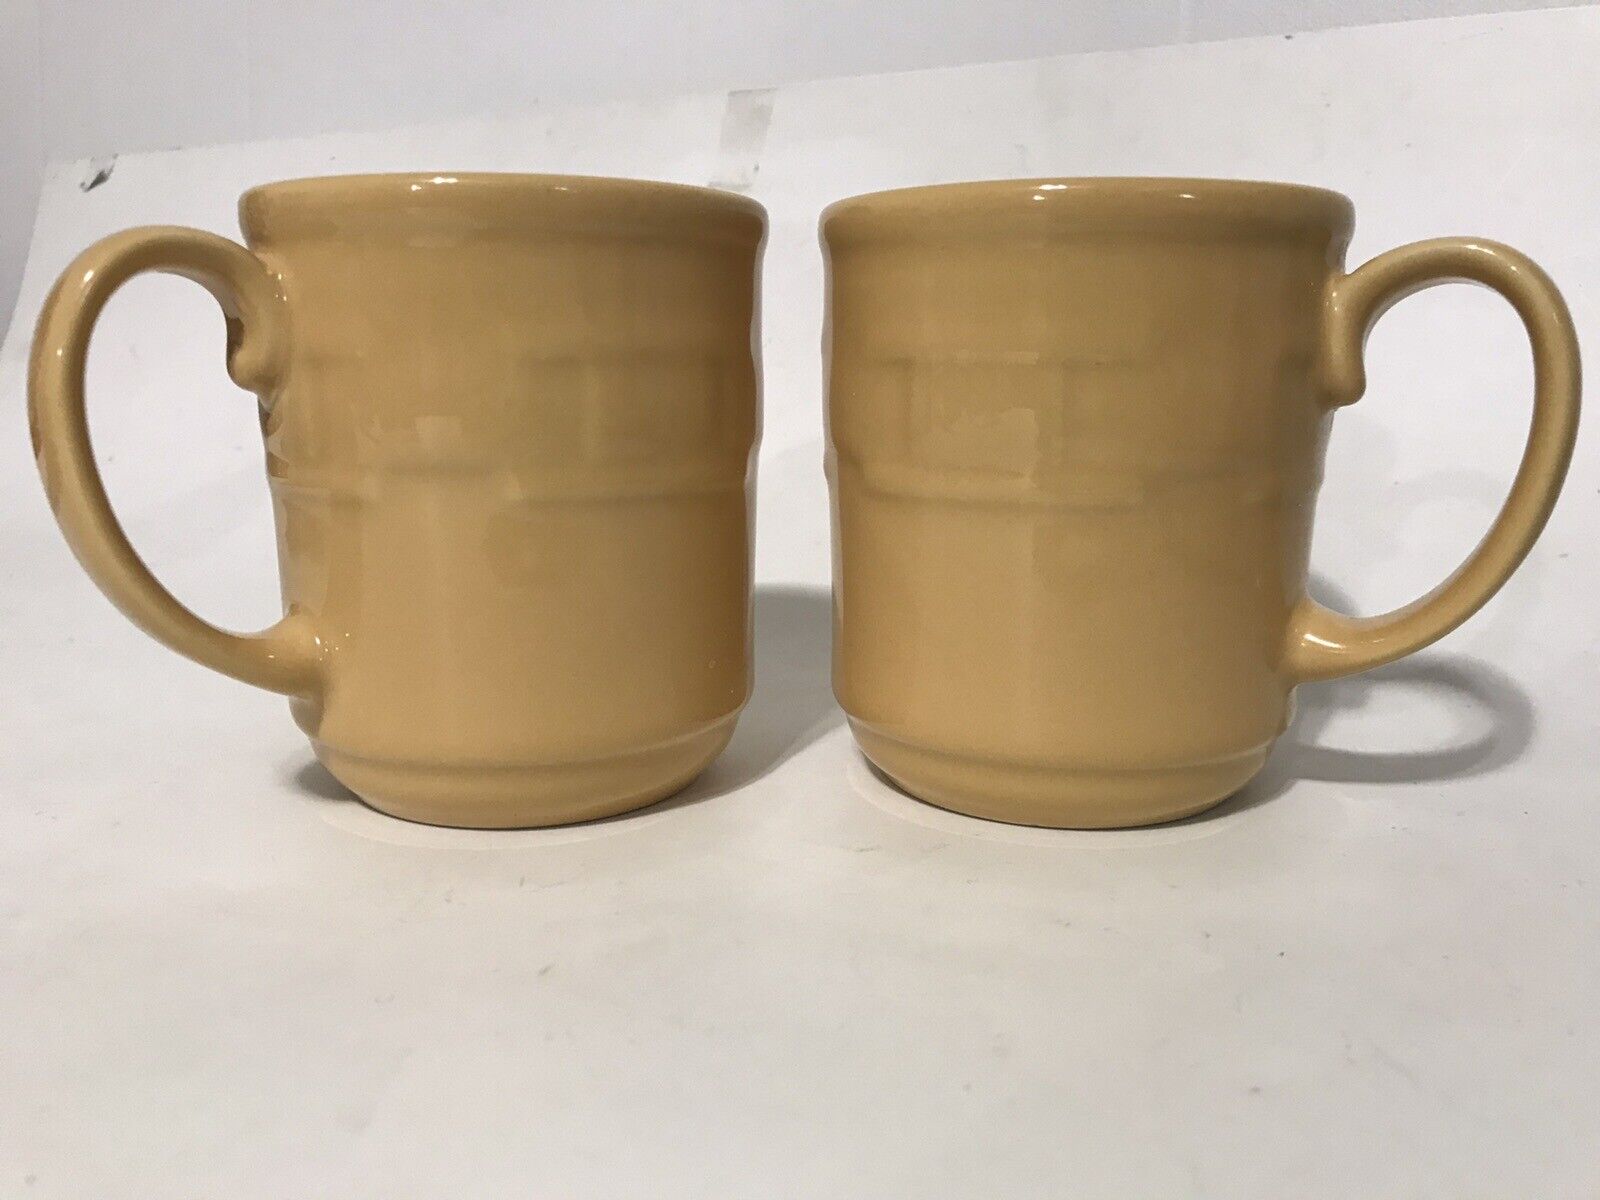 Set 2 Longaberger Pottery Coffe Mugs Cups Woven Tradition USA Butternut, Excell